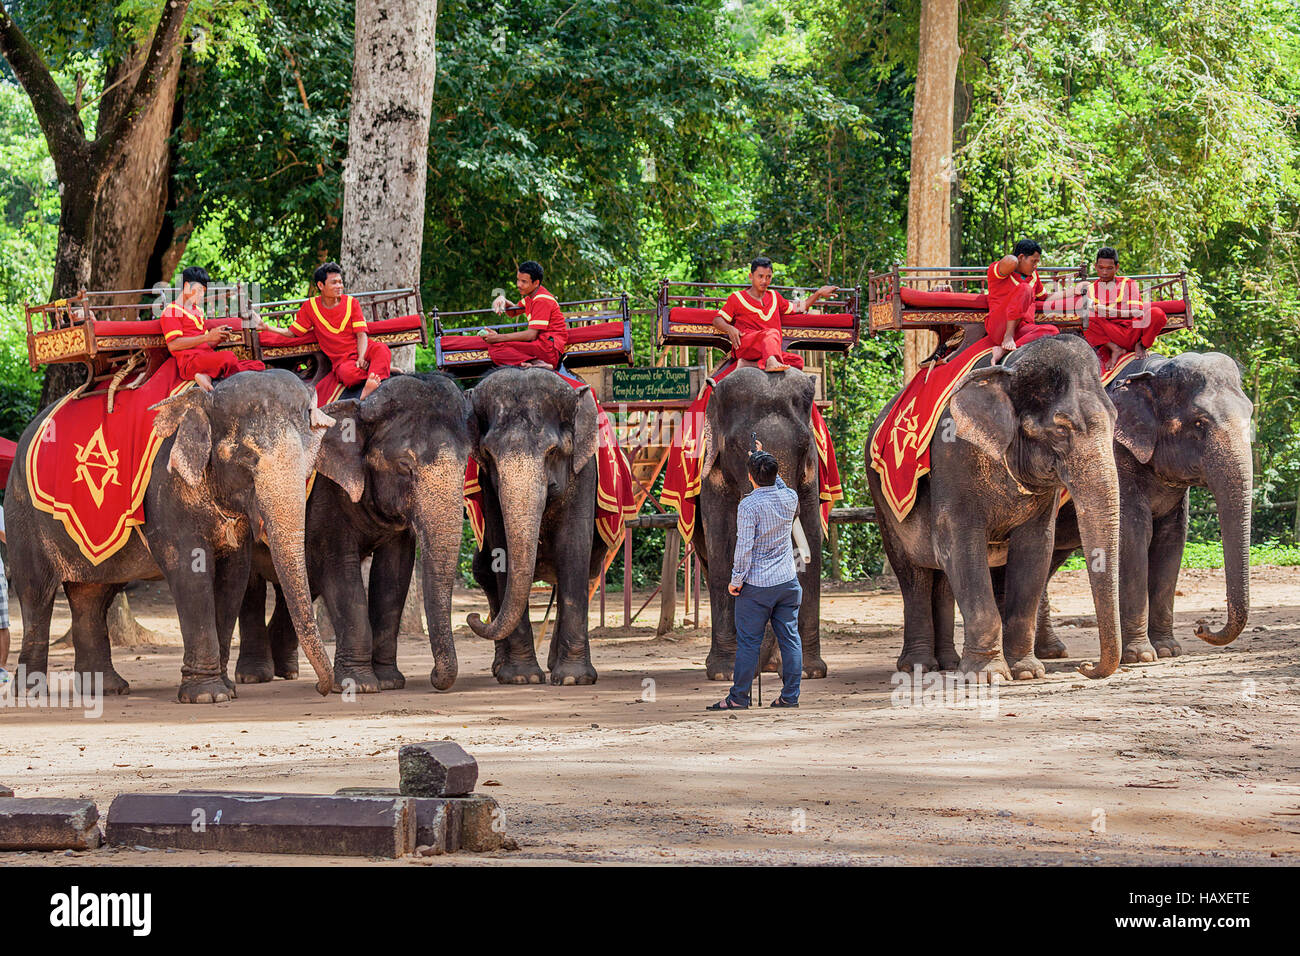 Asian elephants used for taking tourists on a ride around Angkor Thom take a rest under trees in Siem Reap, Kingdom of Cambodia. Stock Photo